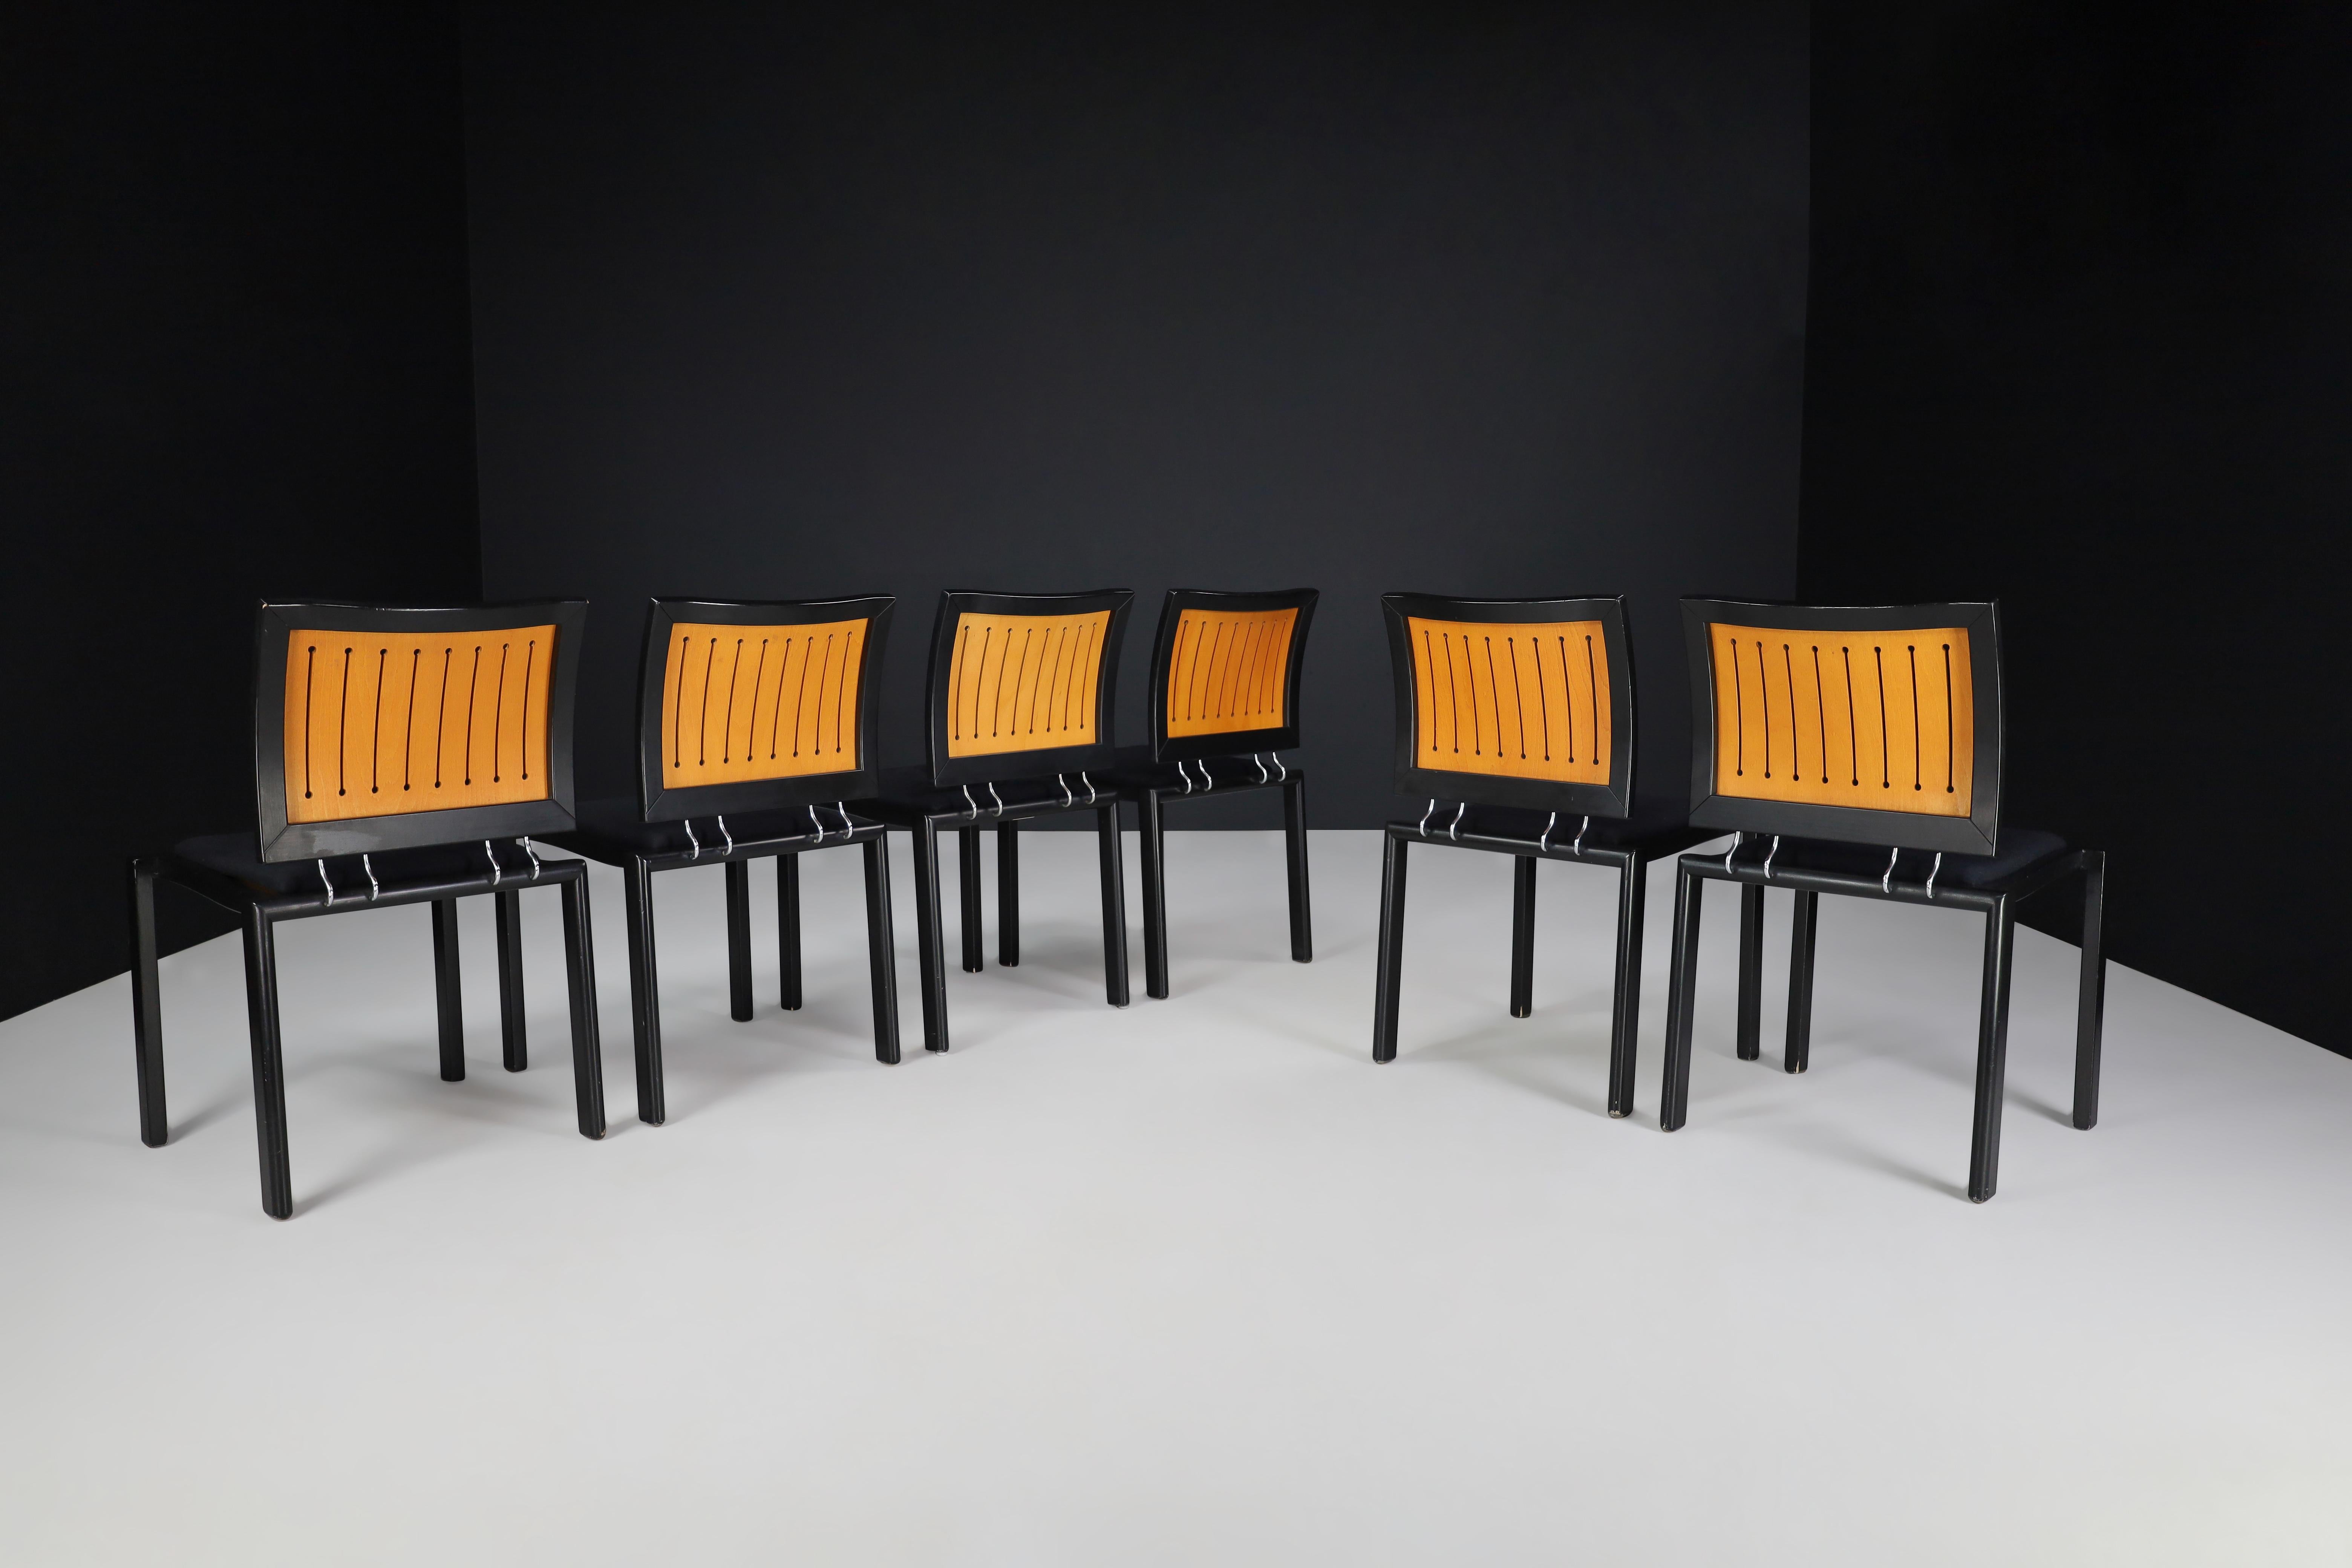 Swiss Quadro Chairs by Bruno Rey & Charles Polin for Dietiker, Switzerland, 1980s For Sale